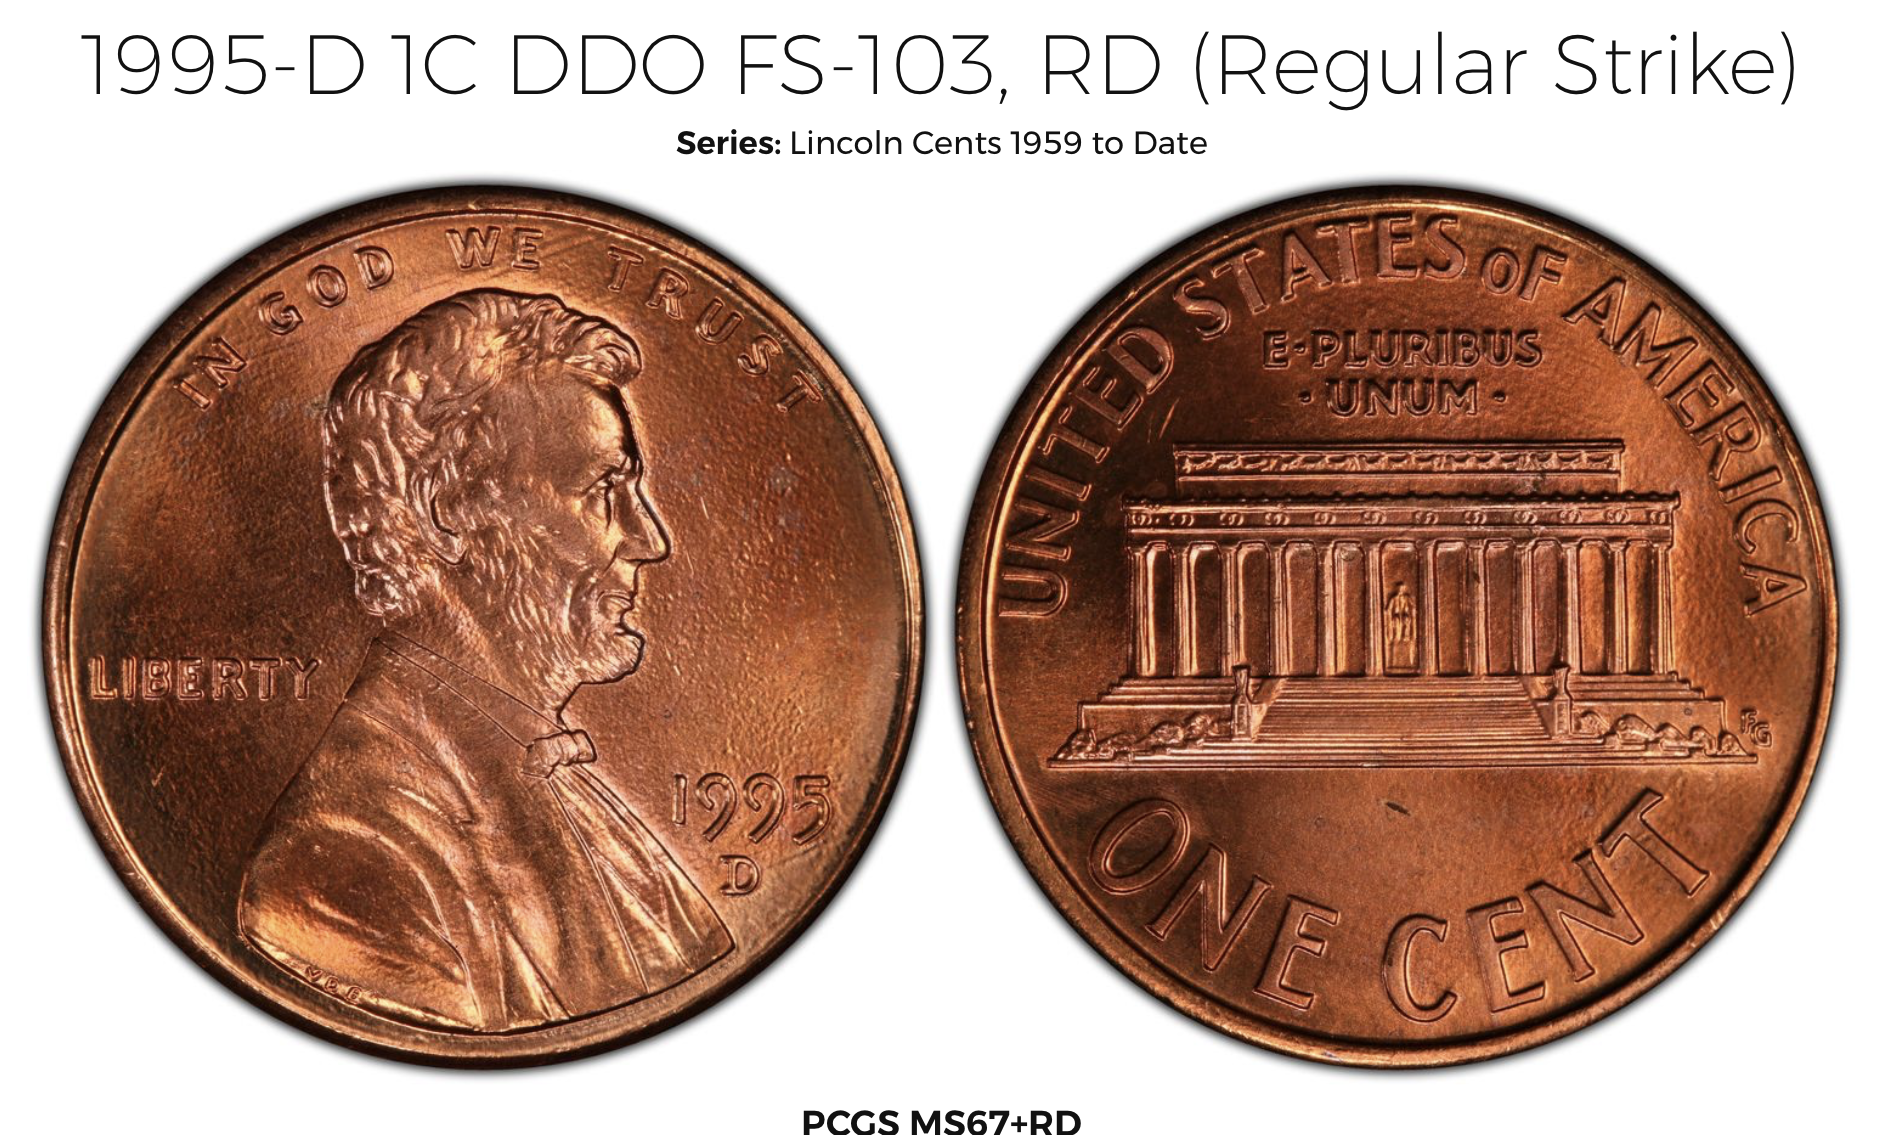 1995-D Doubled Die Lincoln cent value